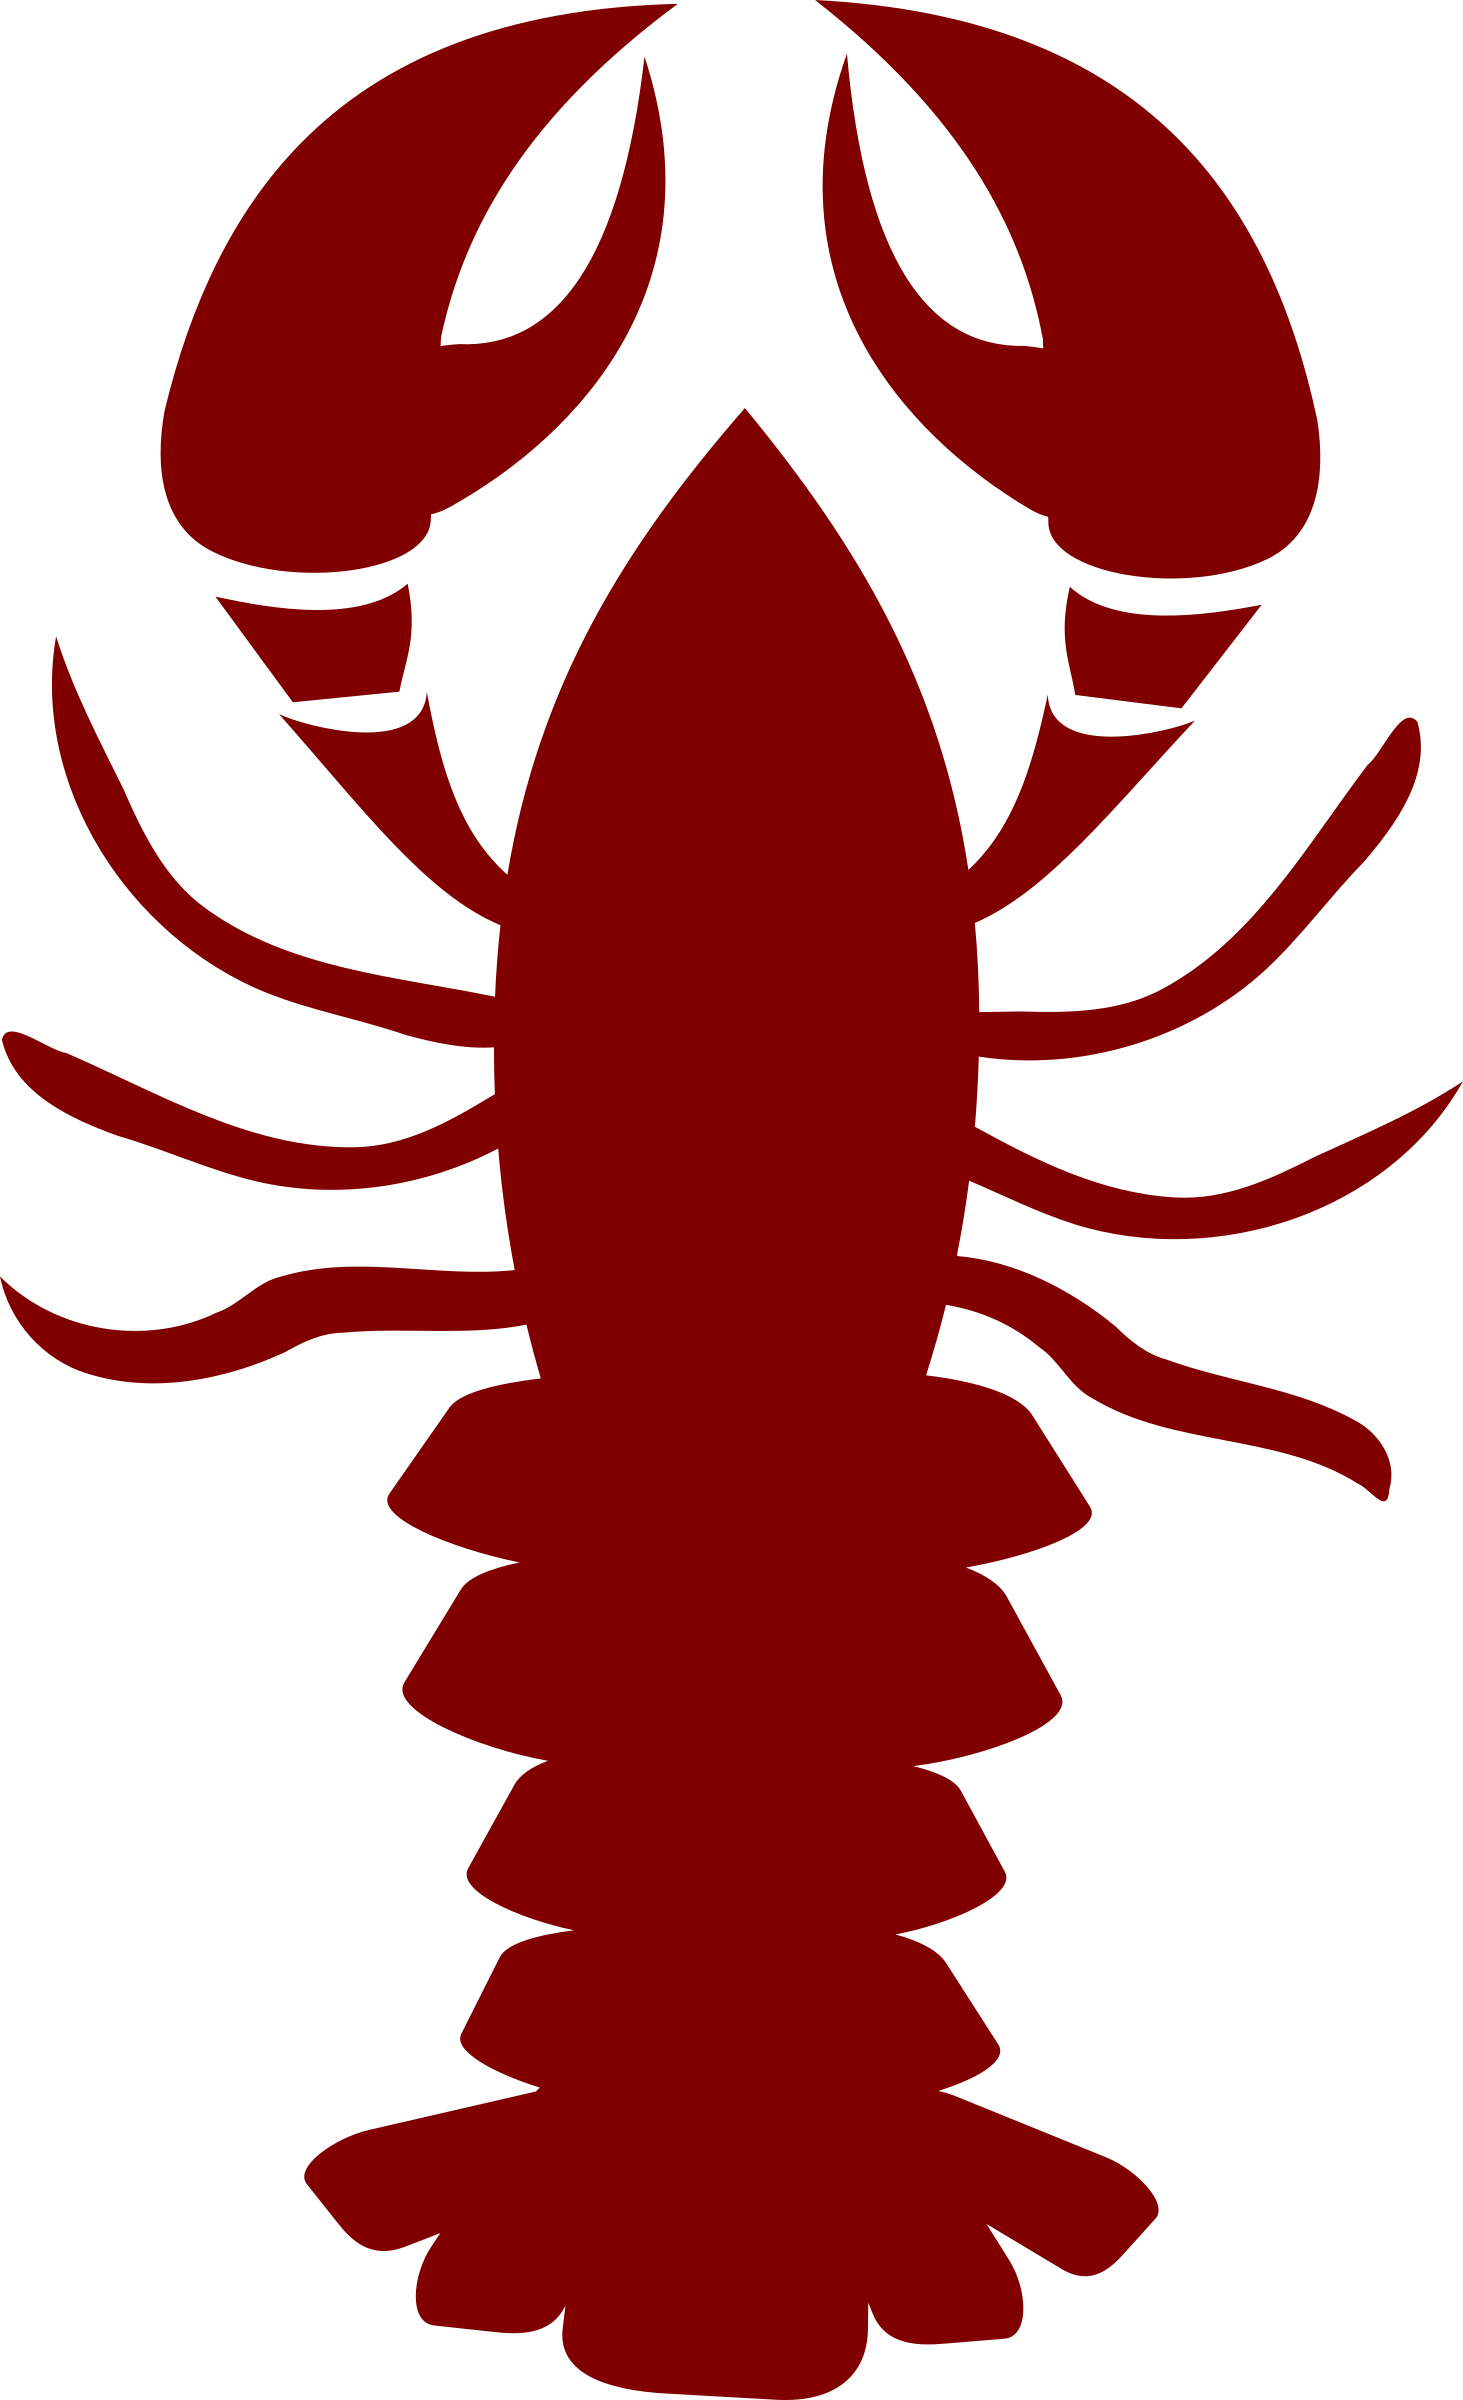 Red Lobster Silhouette Graphic